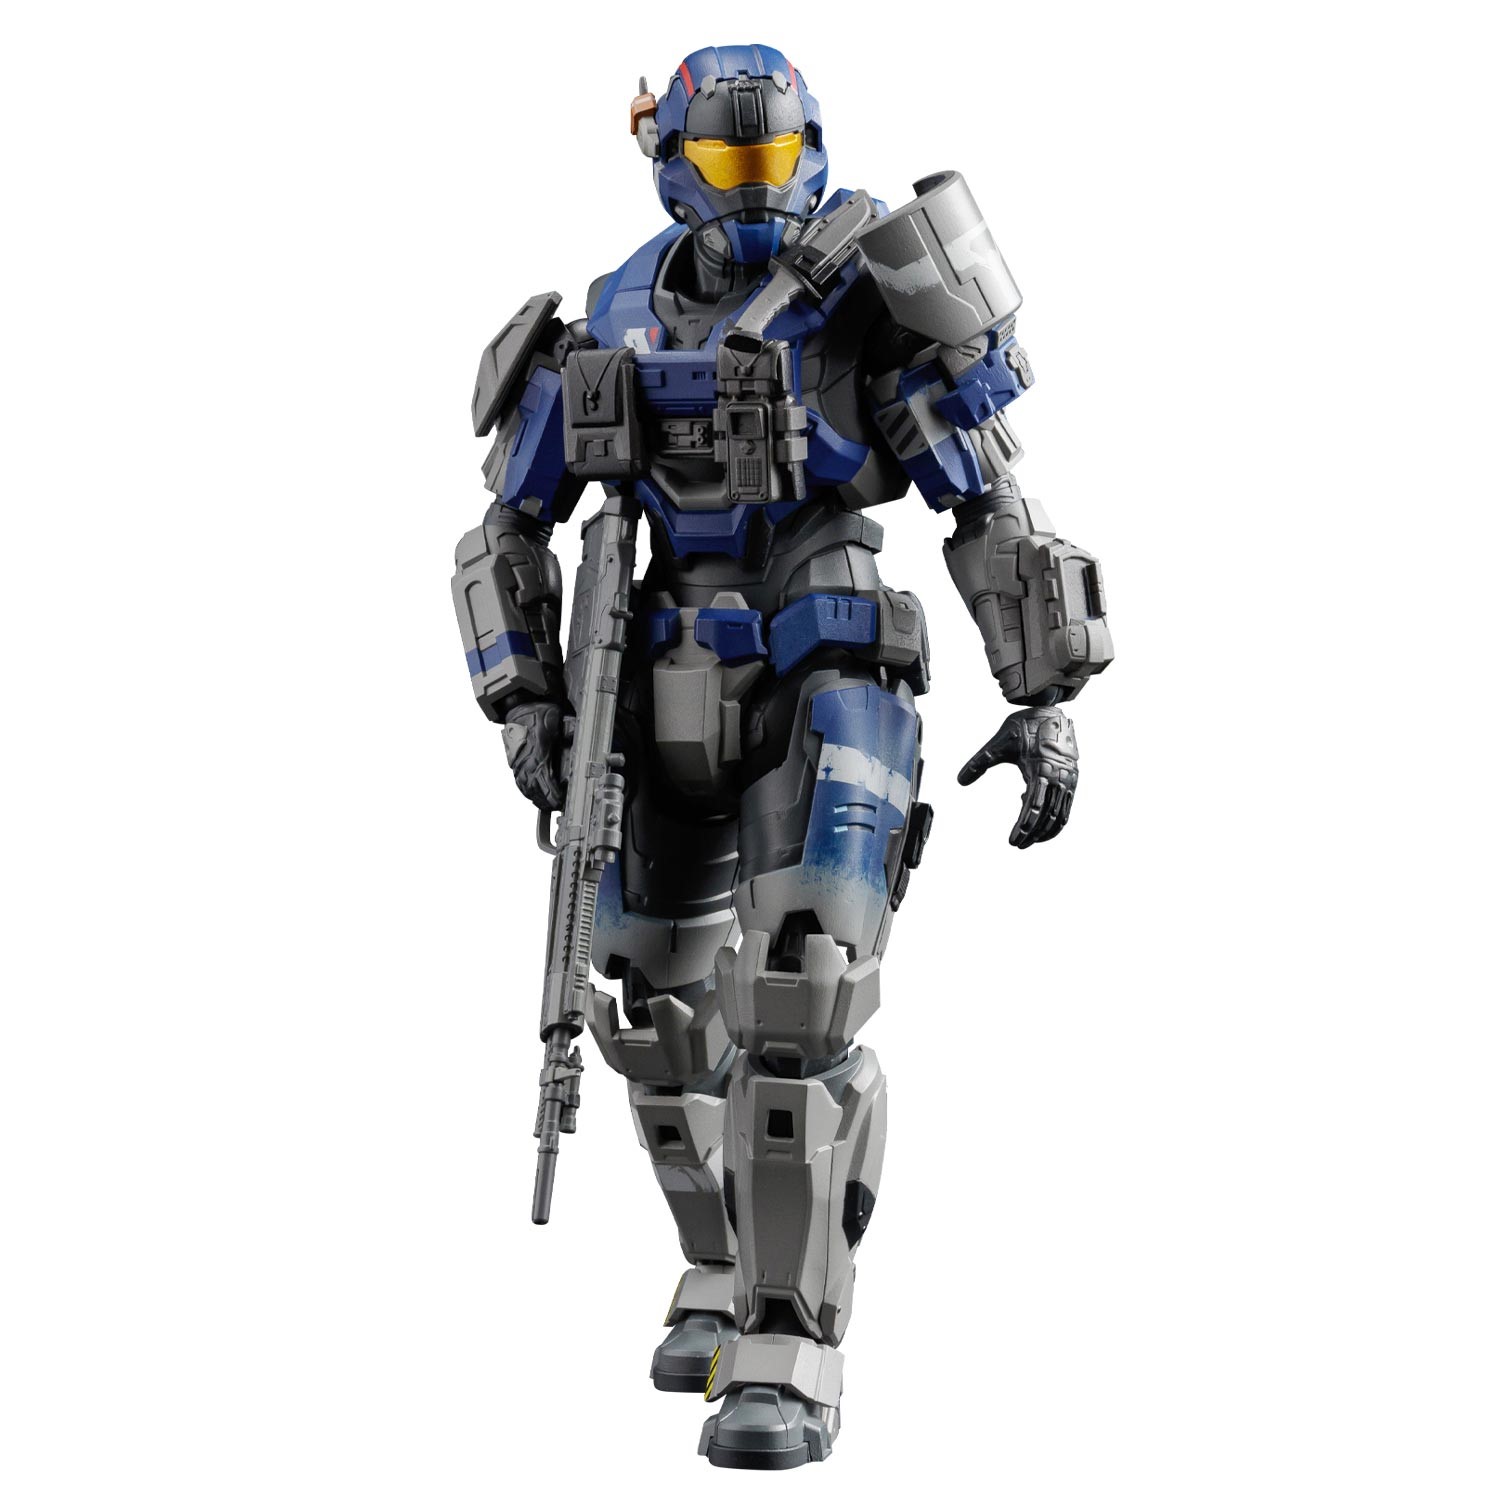 RE:EDIT HALO: REACH 1/12 SCALE CARTER-A259 (Noble One) |1000TOYS 